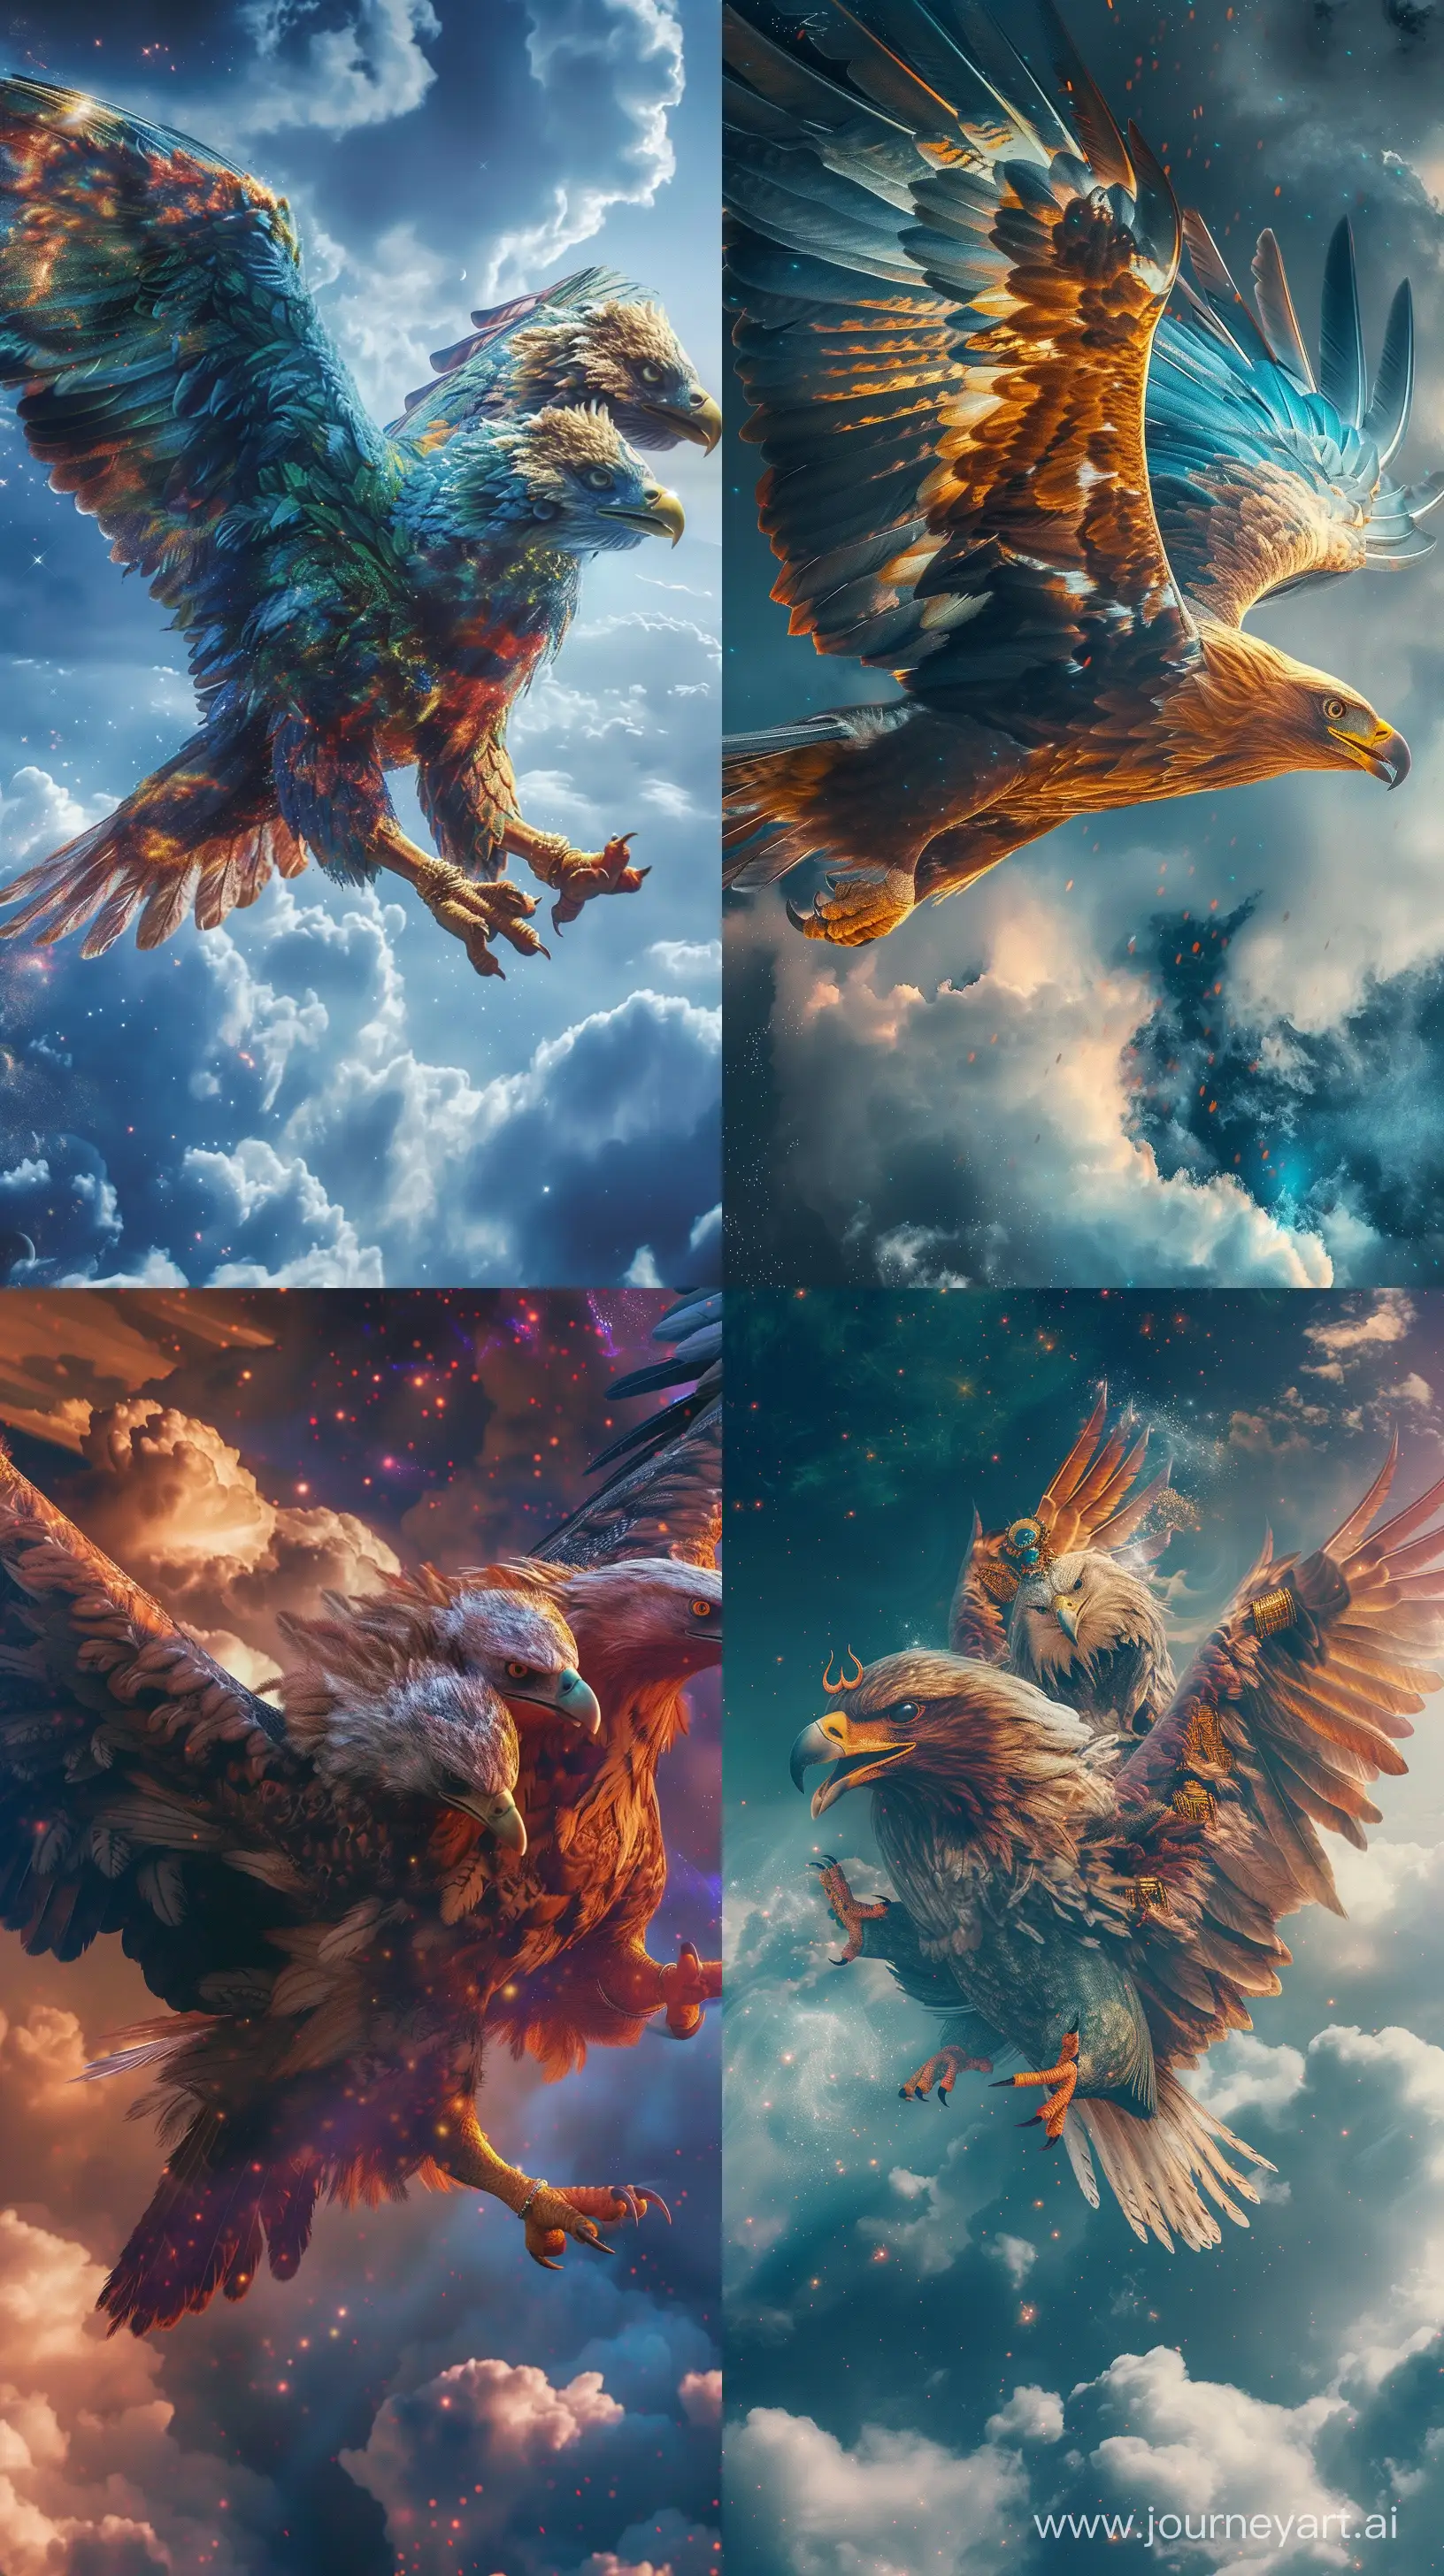 Ancient-Hindu-Mythological-Eagle-with-Dual-Heads-Soaring-in-Celestial-Sky